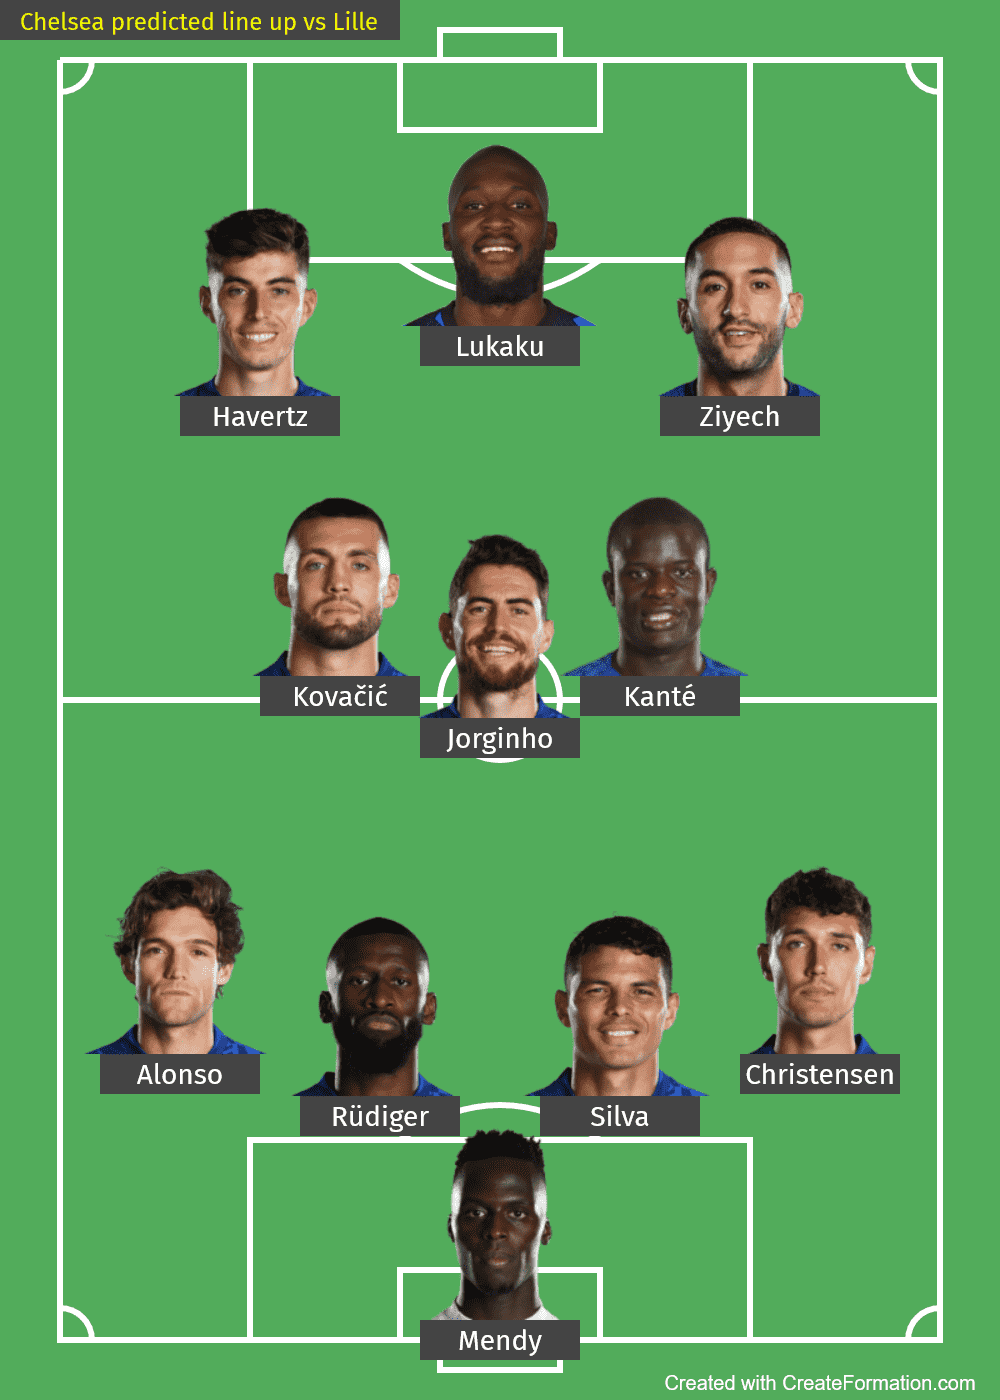 Chelsea predicted line up vs Lille-2022-UCL